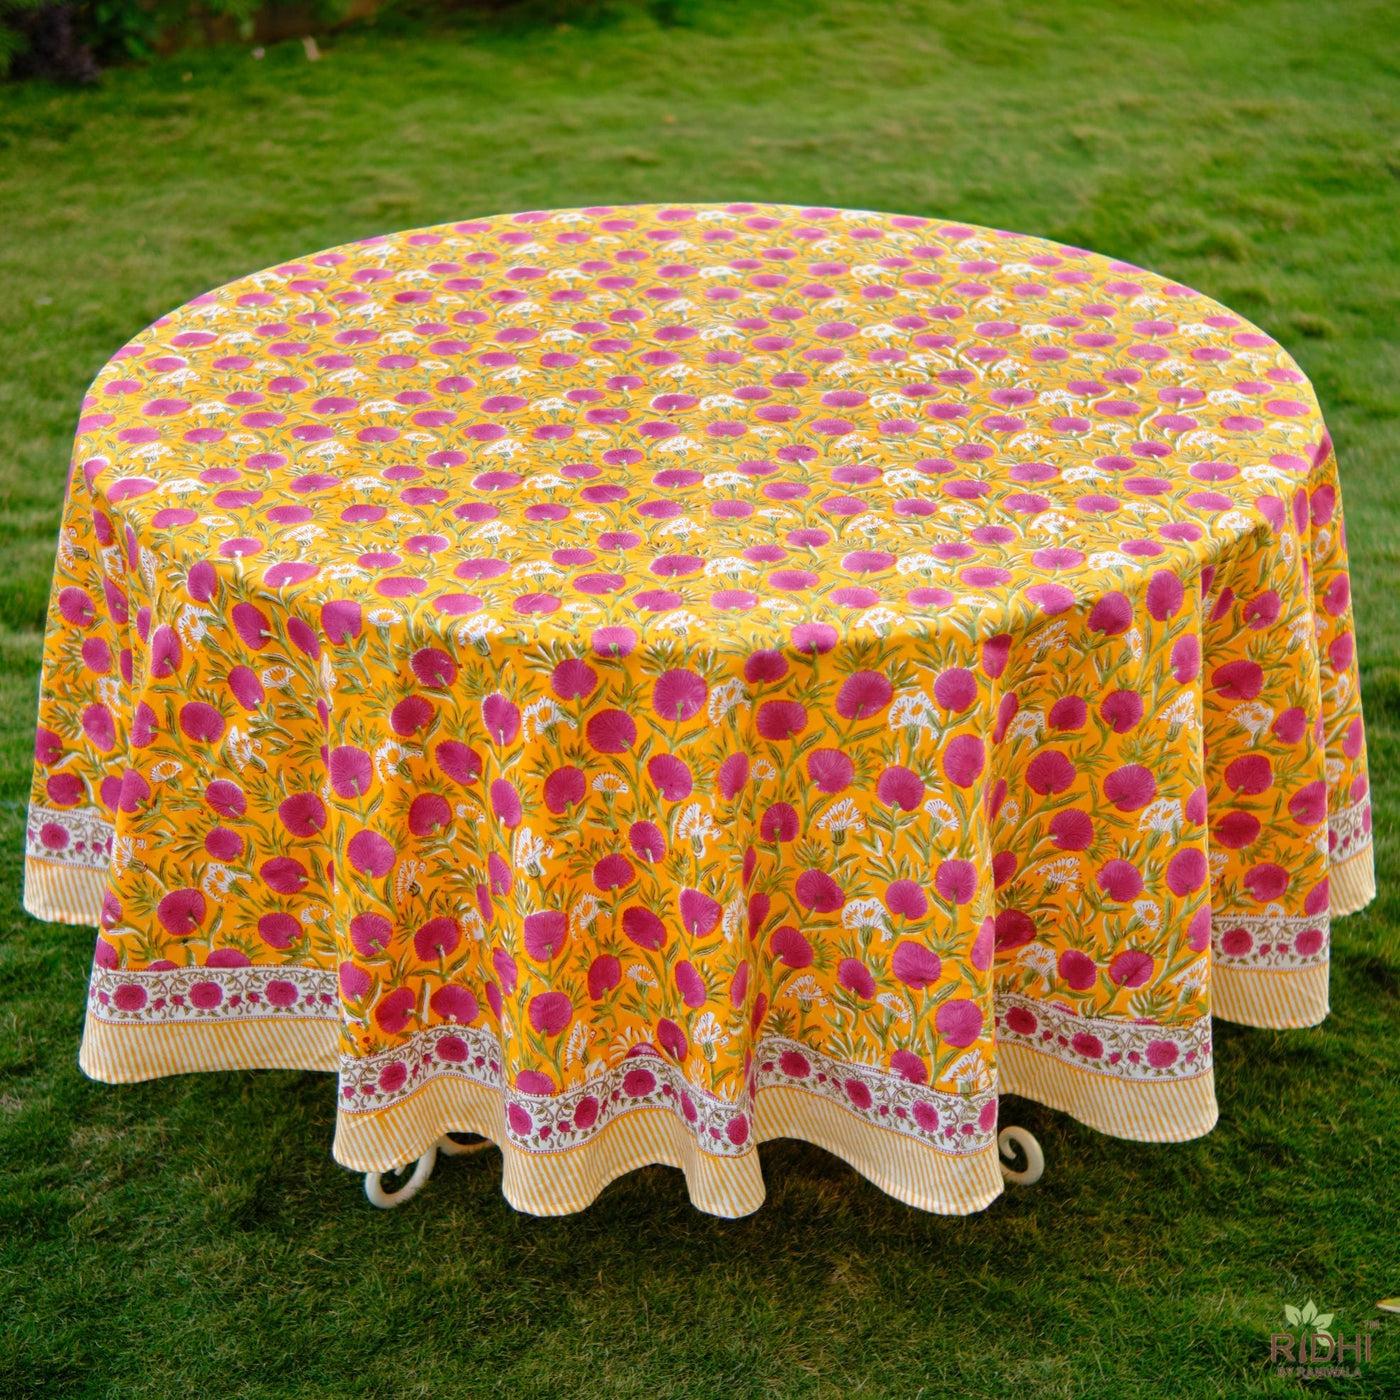 LF table linen Marigold Round Cotton Tablecloth Table Cover 